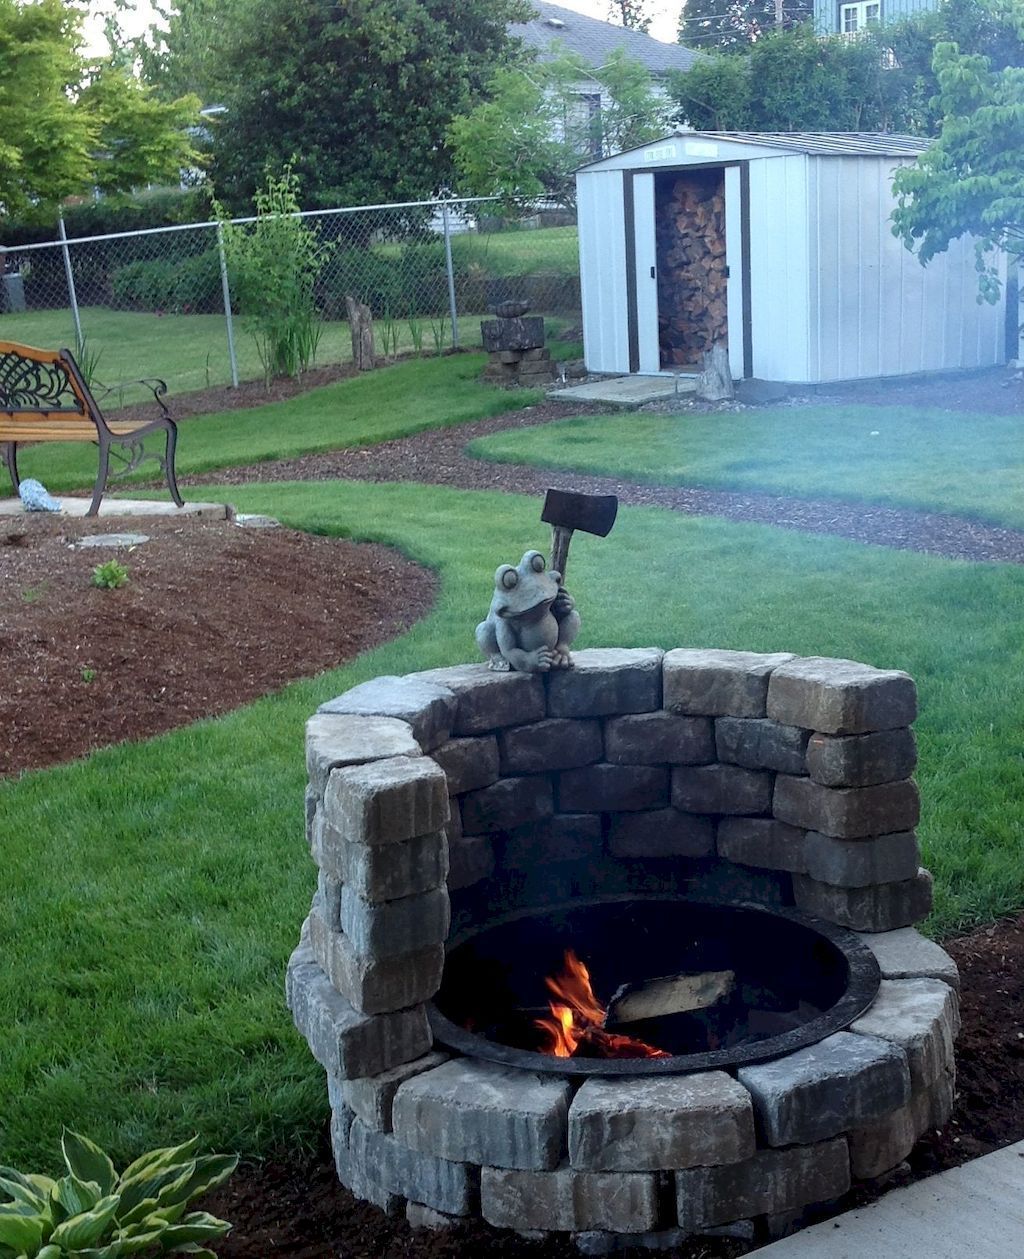  13 Inspiring DIY Fire Pit Ideas to Improve Your Backyard (With images ...